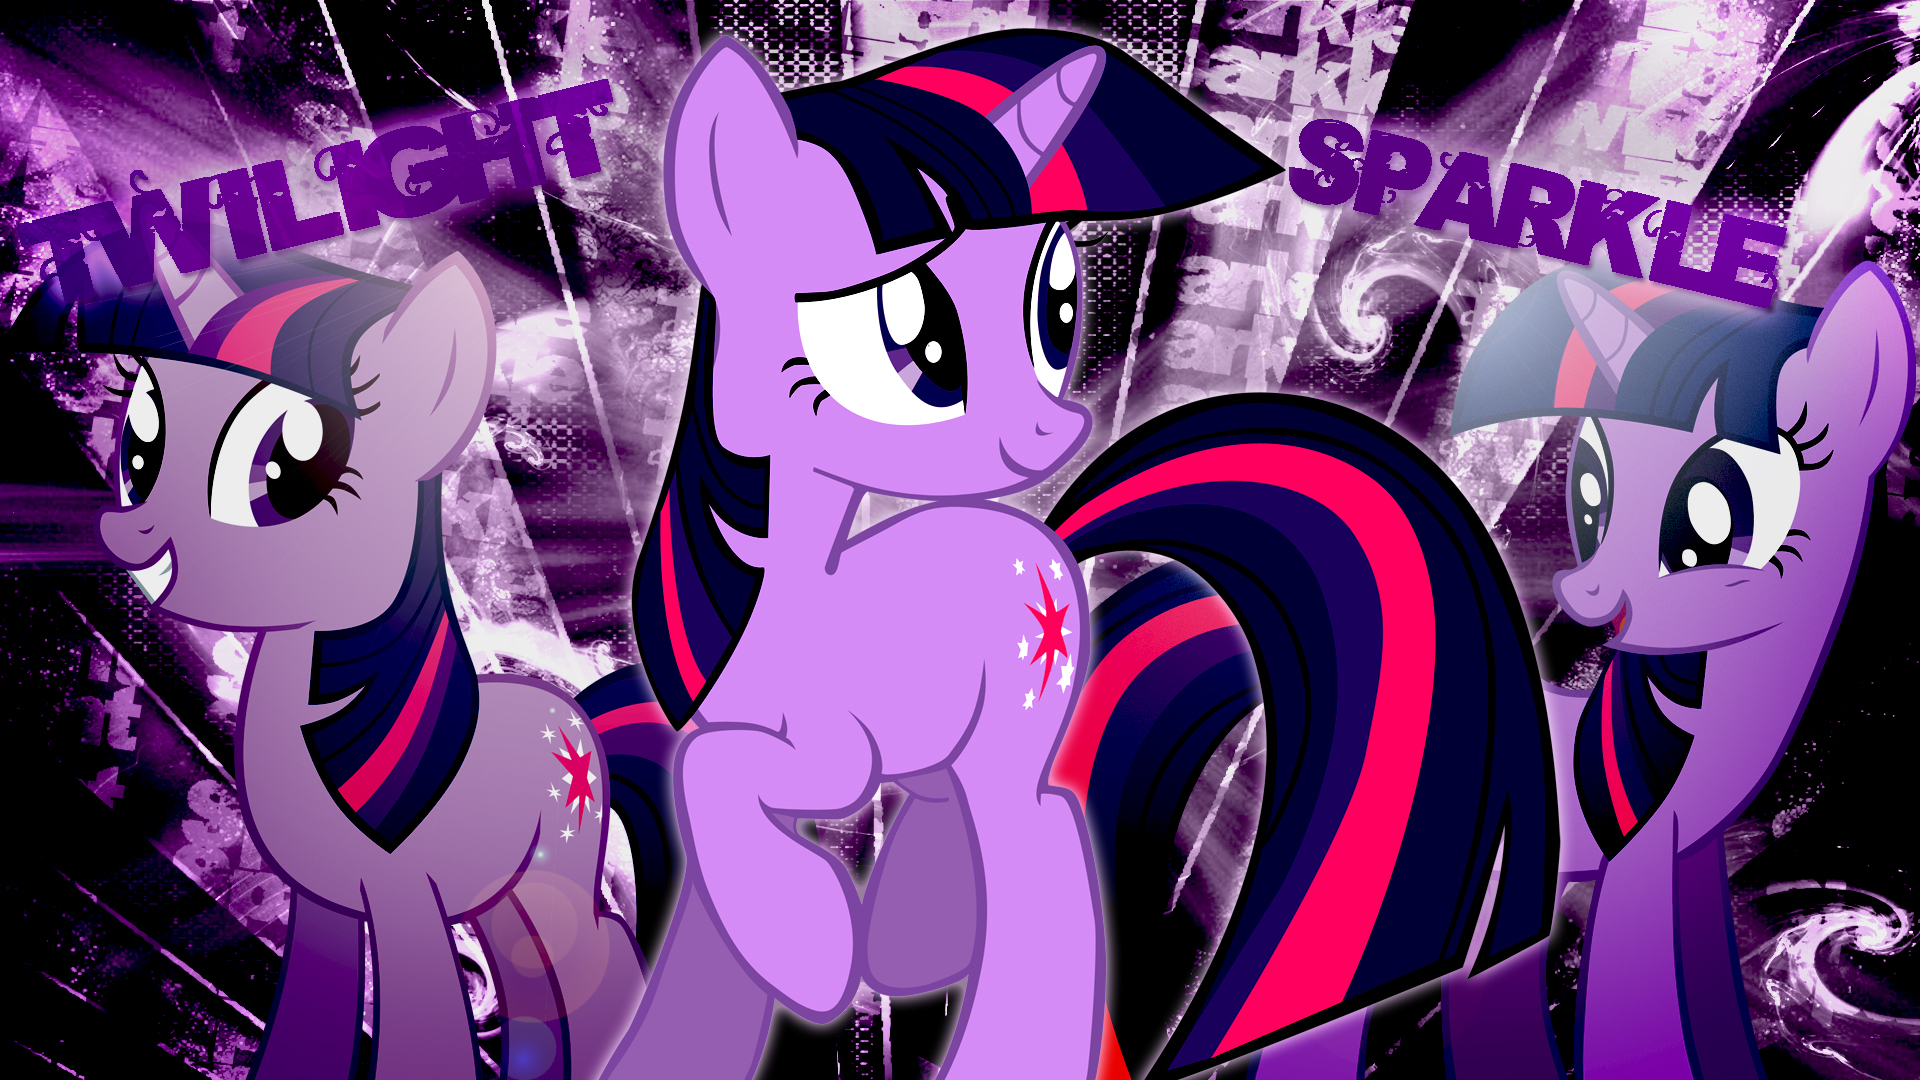 Twilight Sparkle Wallpaper by AncientKale, Bl1ghtmare, HankOfficer and TygerxL